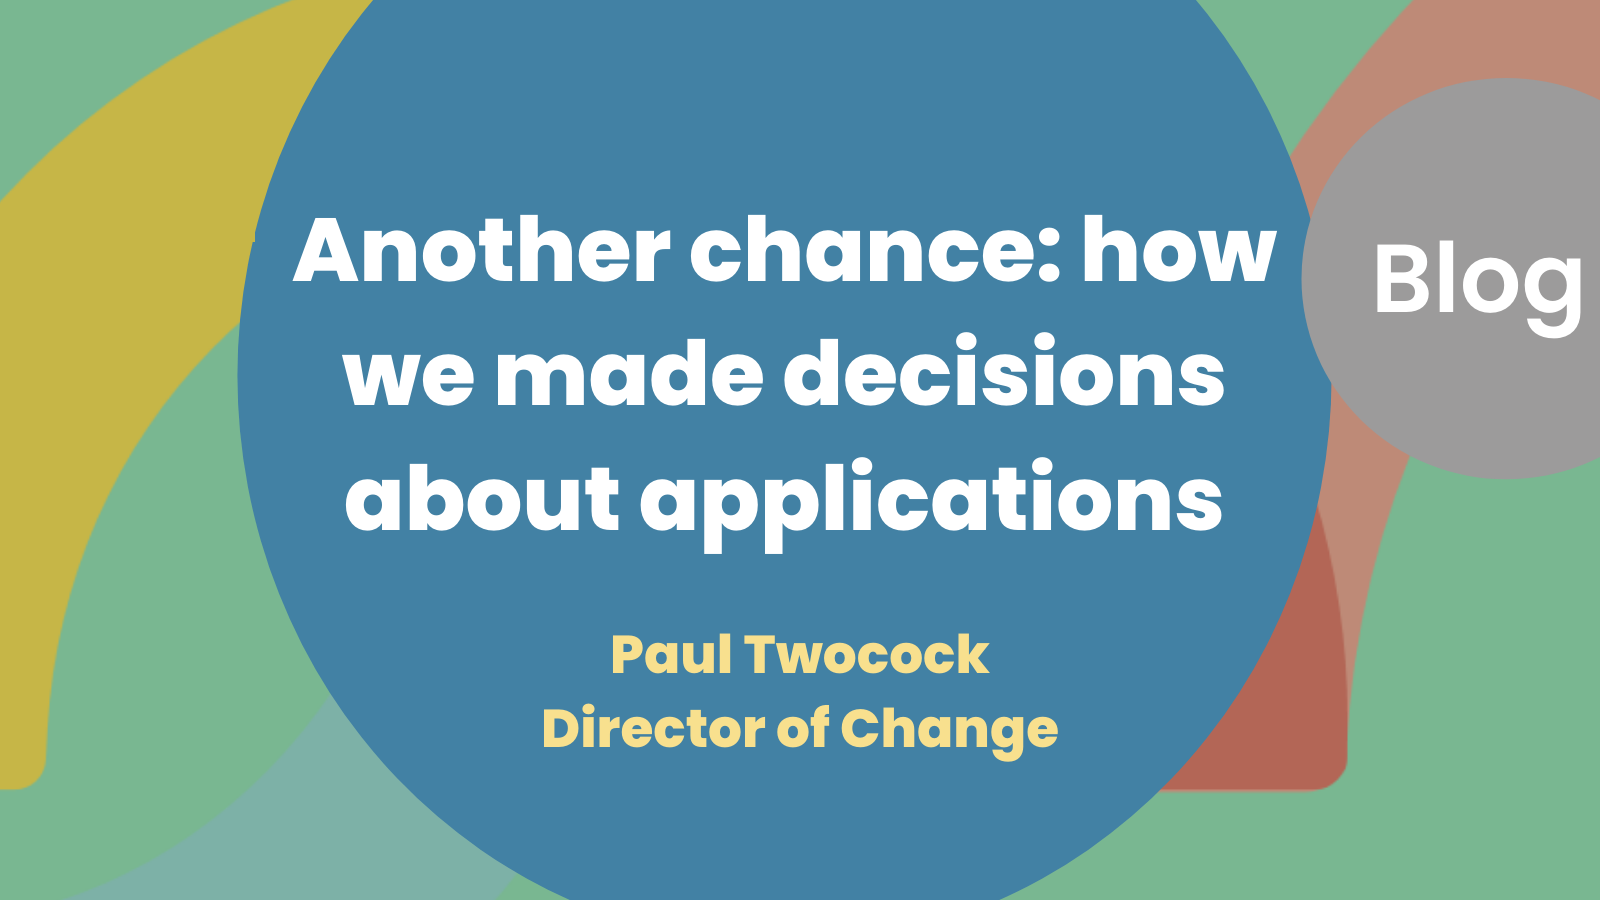 Blog: Another chance - how we made decision about applications by Paul Twocock